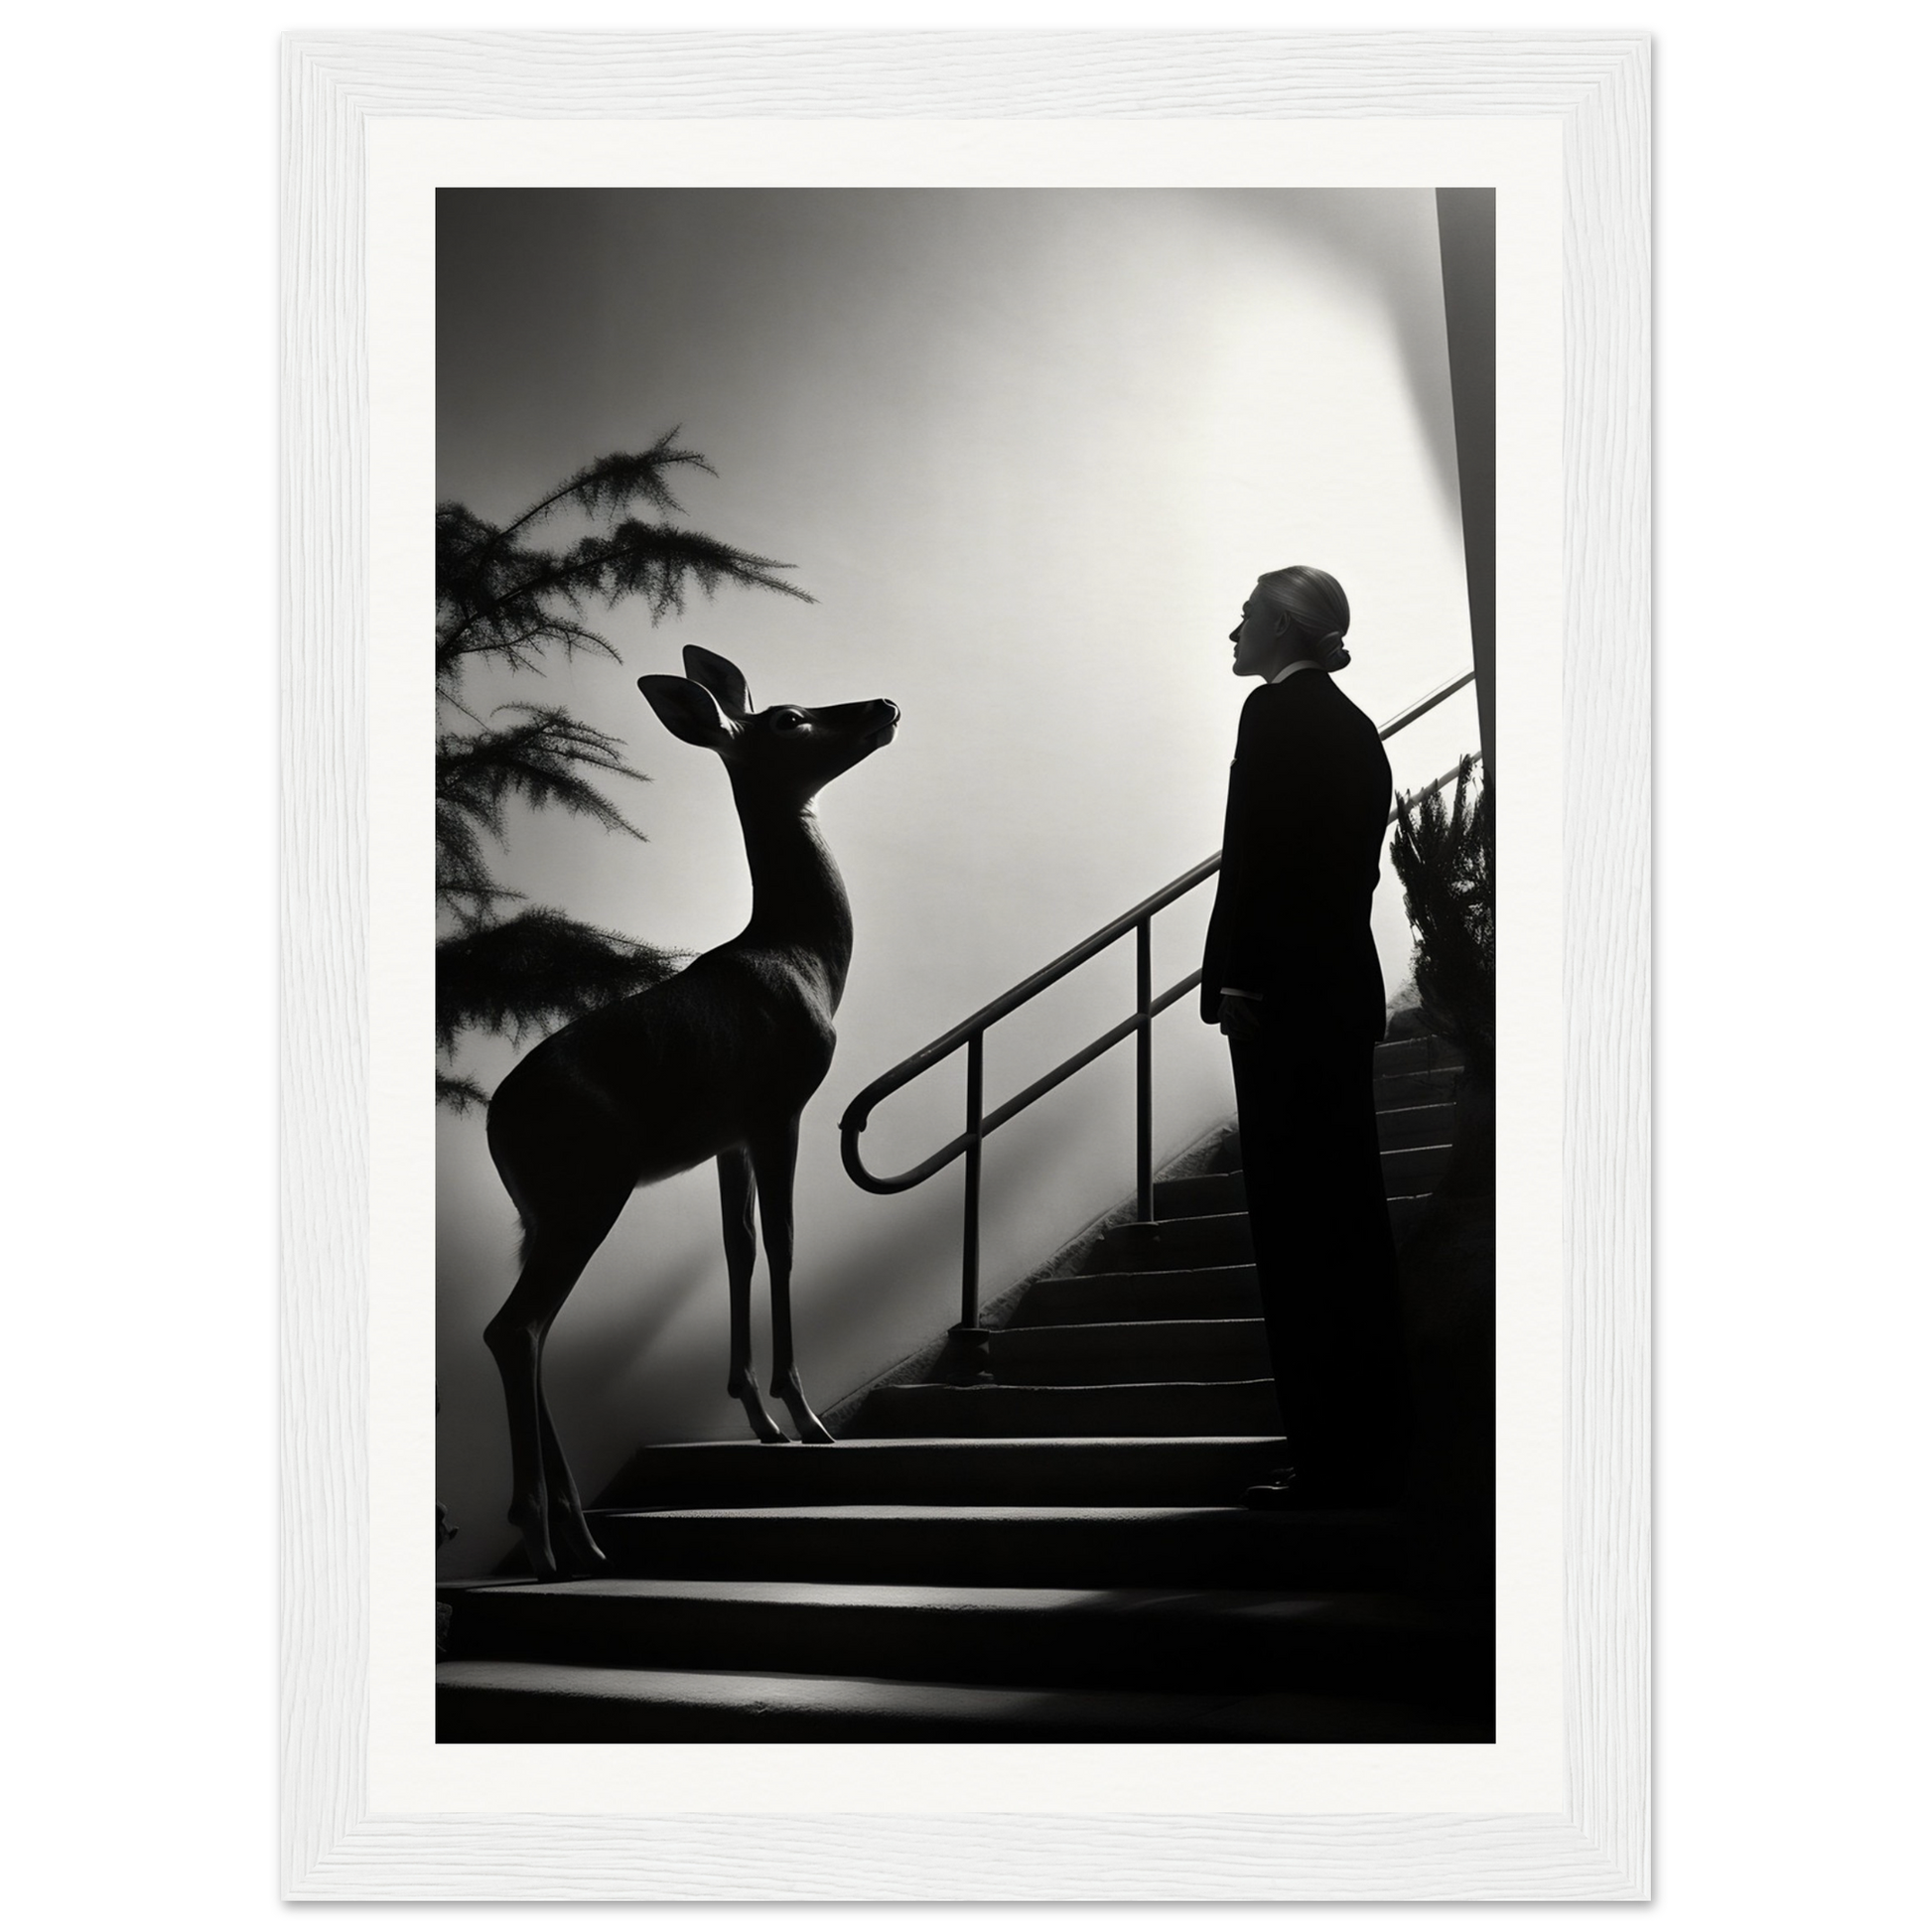 A man in a suit standing next to a deer on the stairs, perfect for The Runway The Oracle Windows™ Collection wall art poster for my wall.